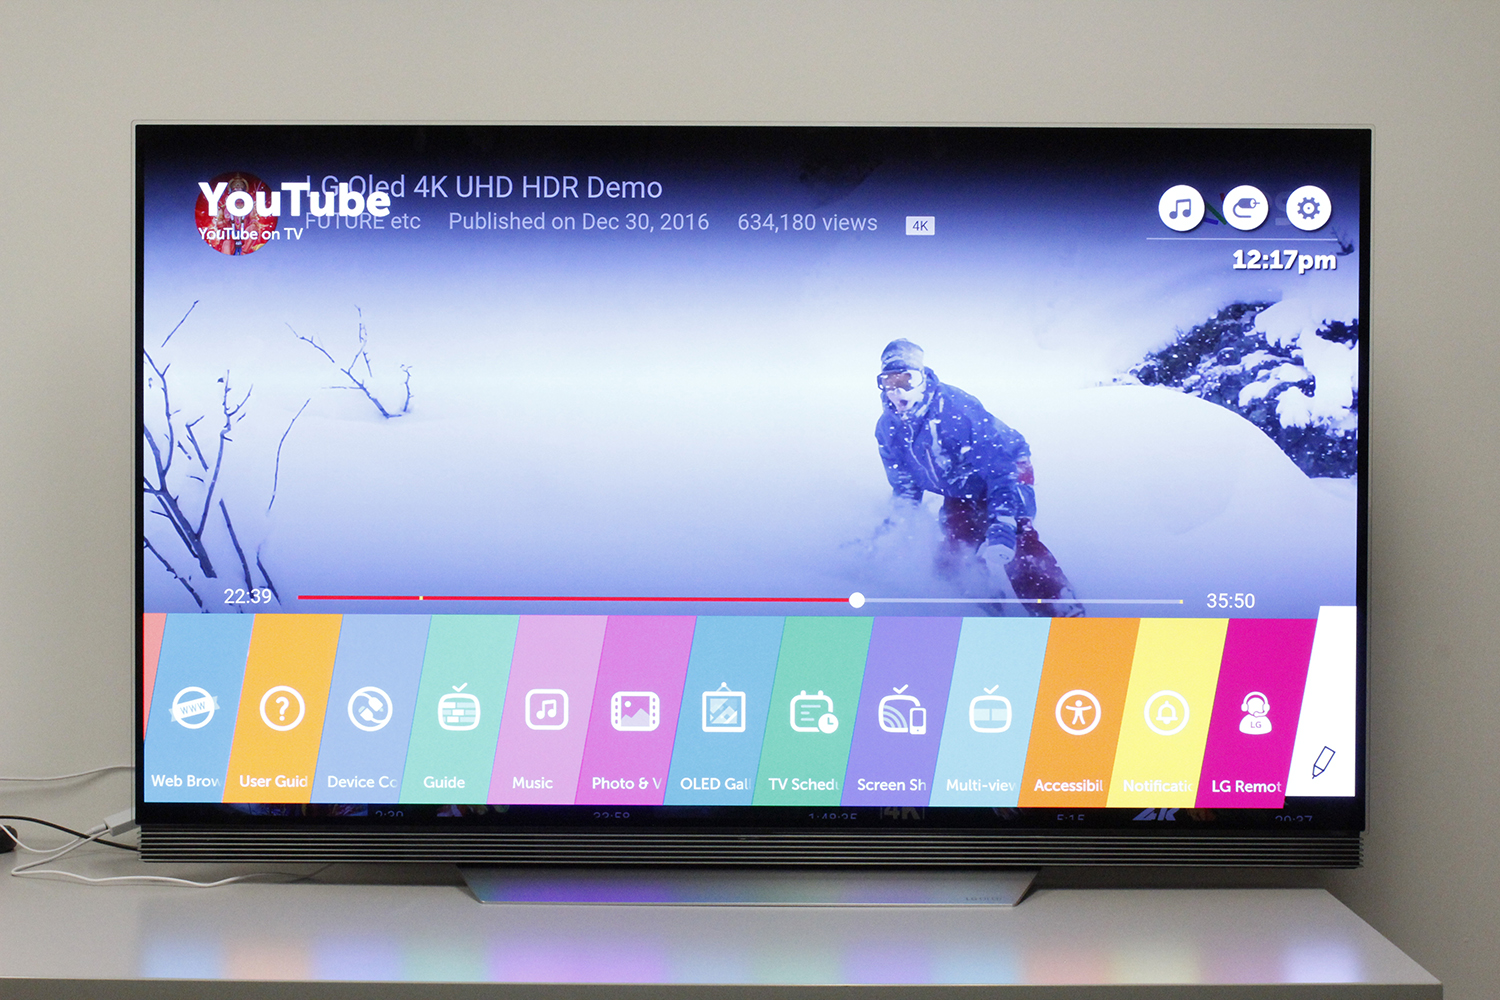 How To Turn Off LG Smart TV